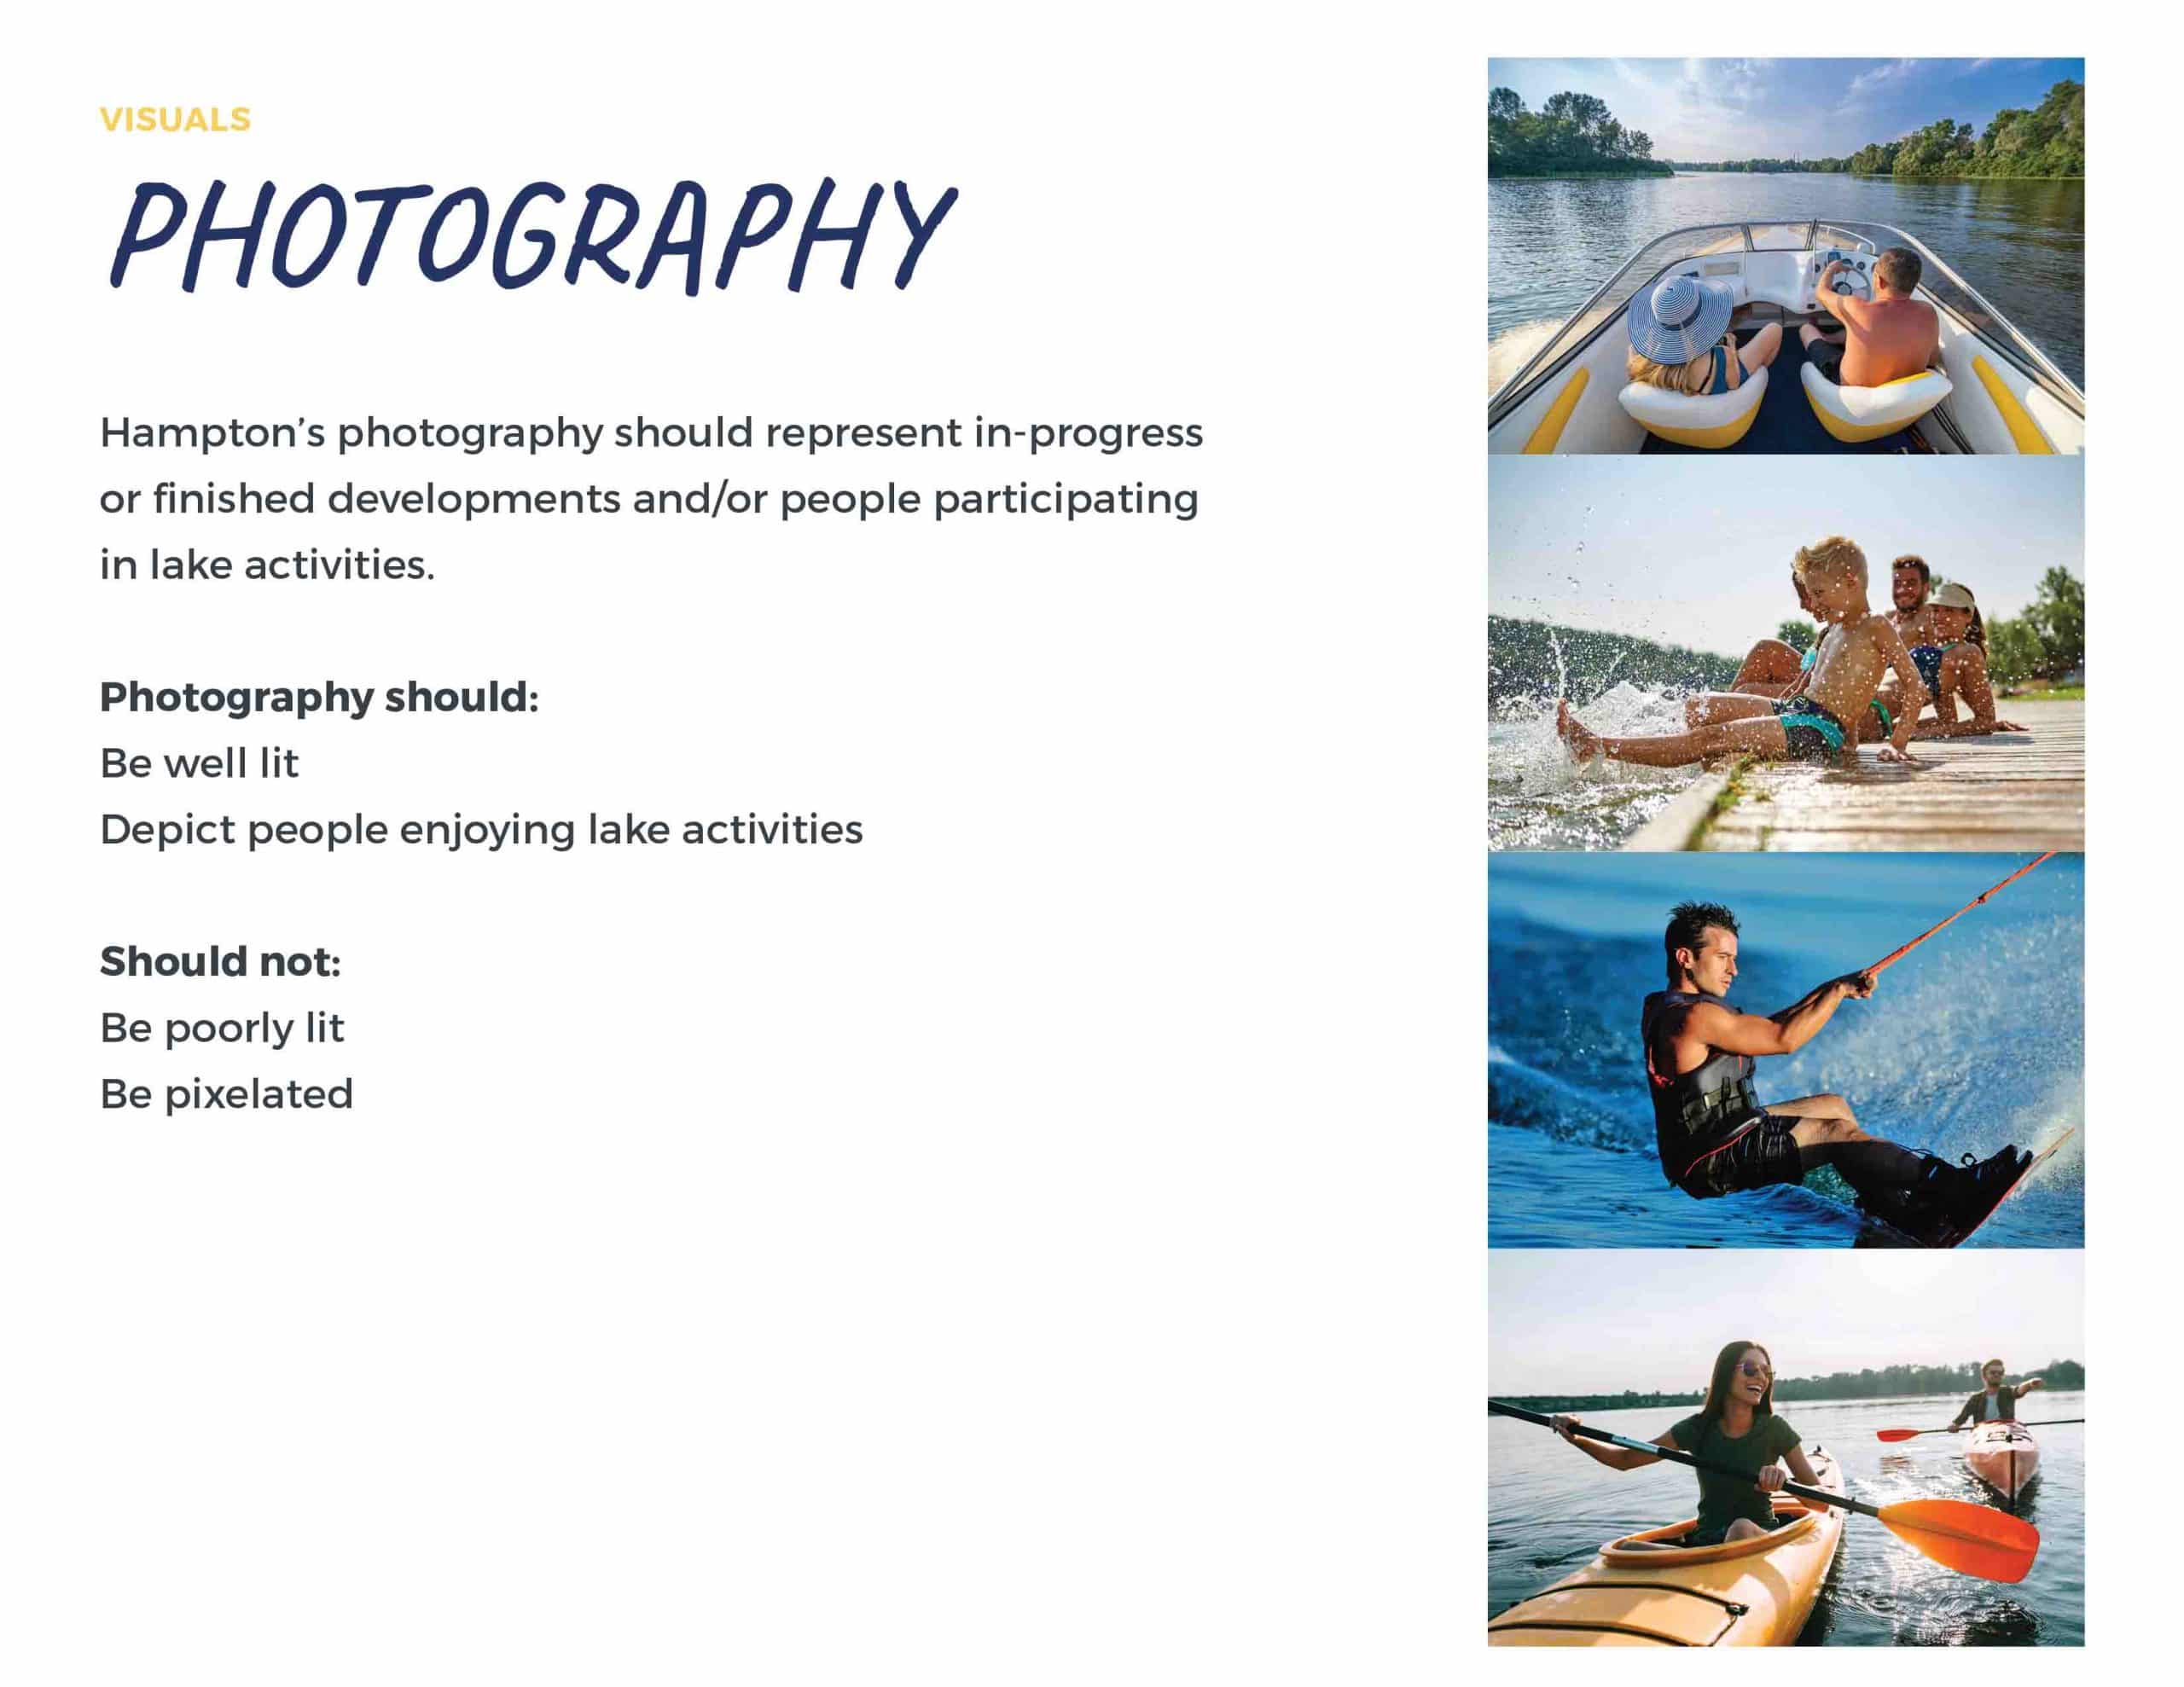 HDS Brand Guide - Photography